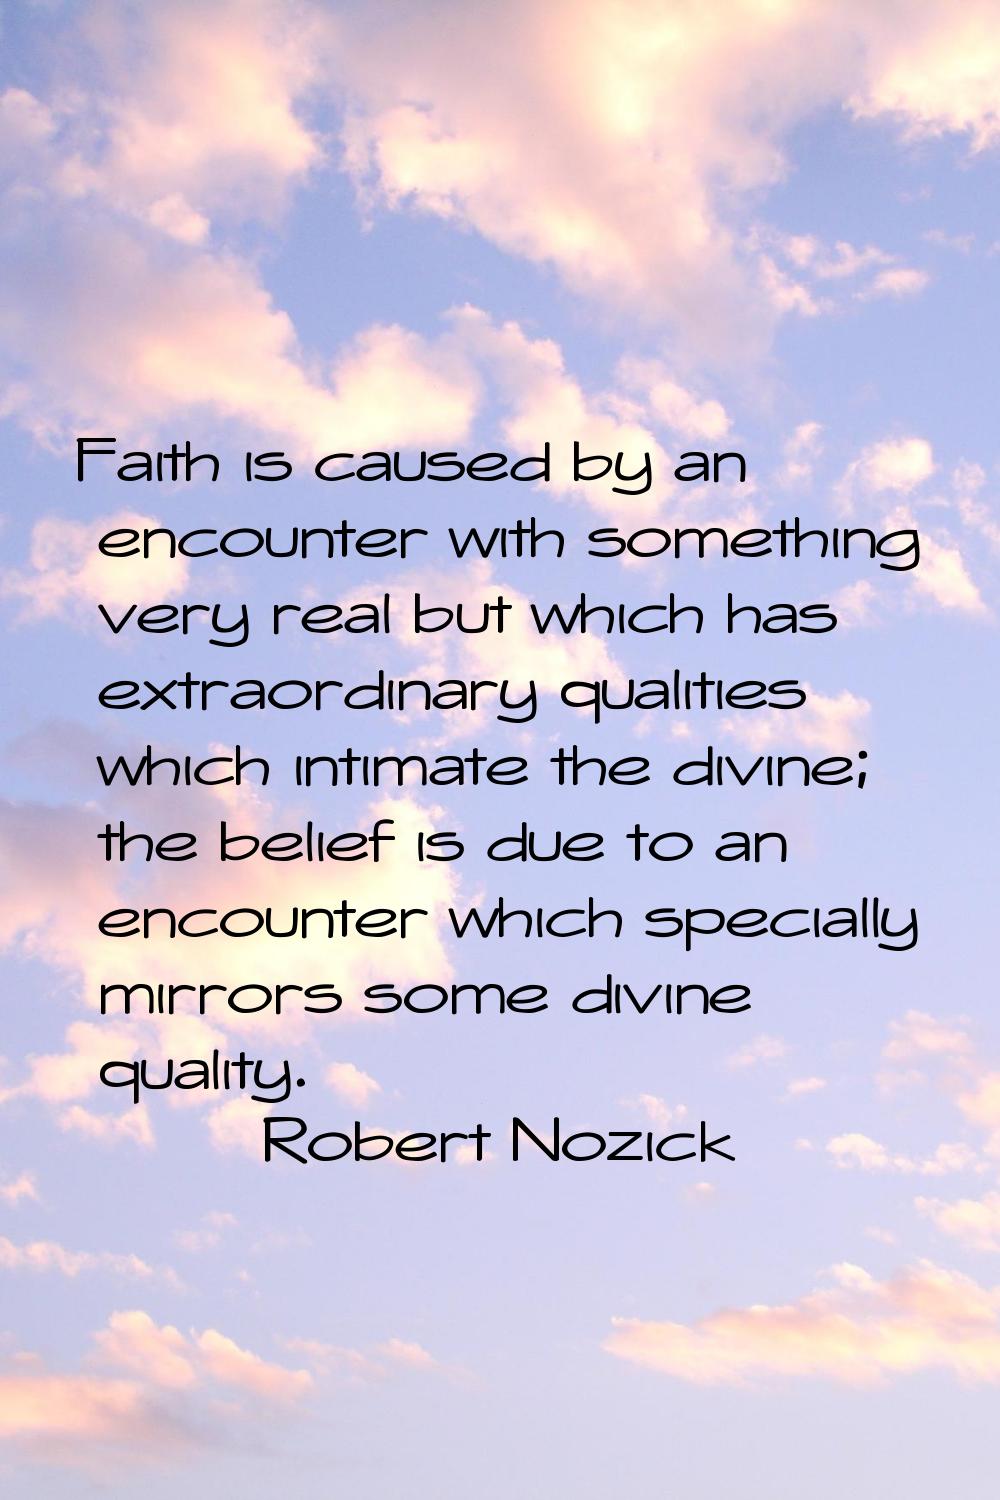 Faith is caused by an encounter with something very real but which has extraordinary qualities whic